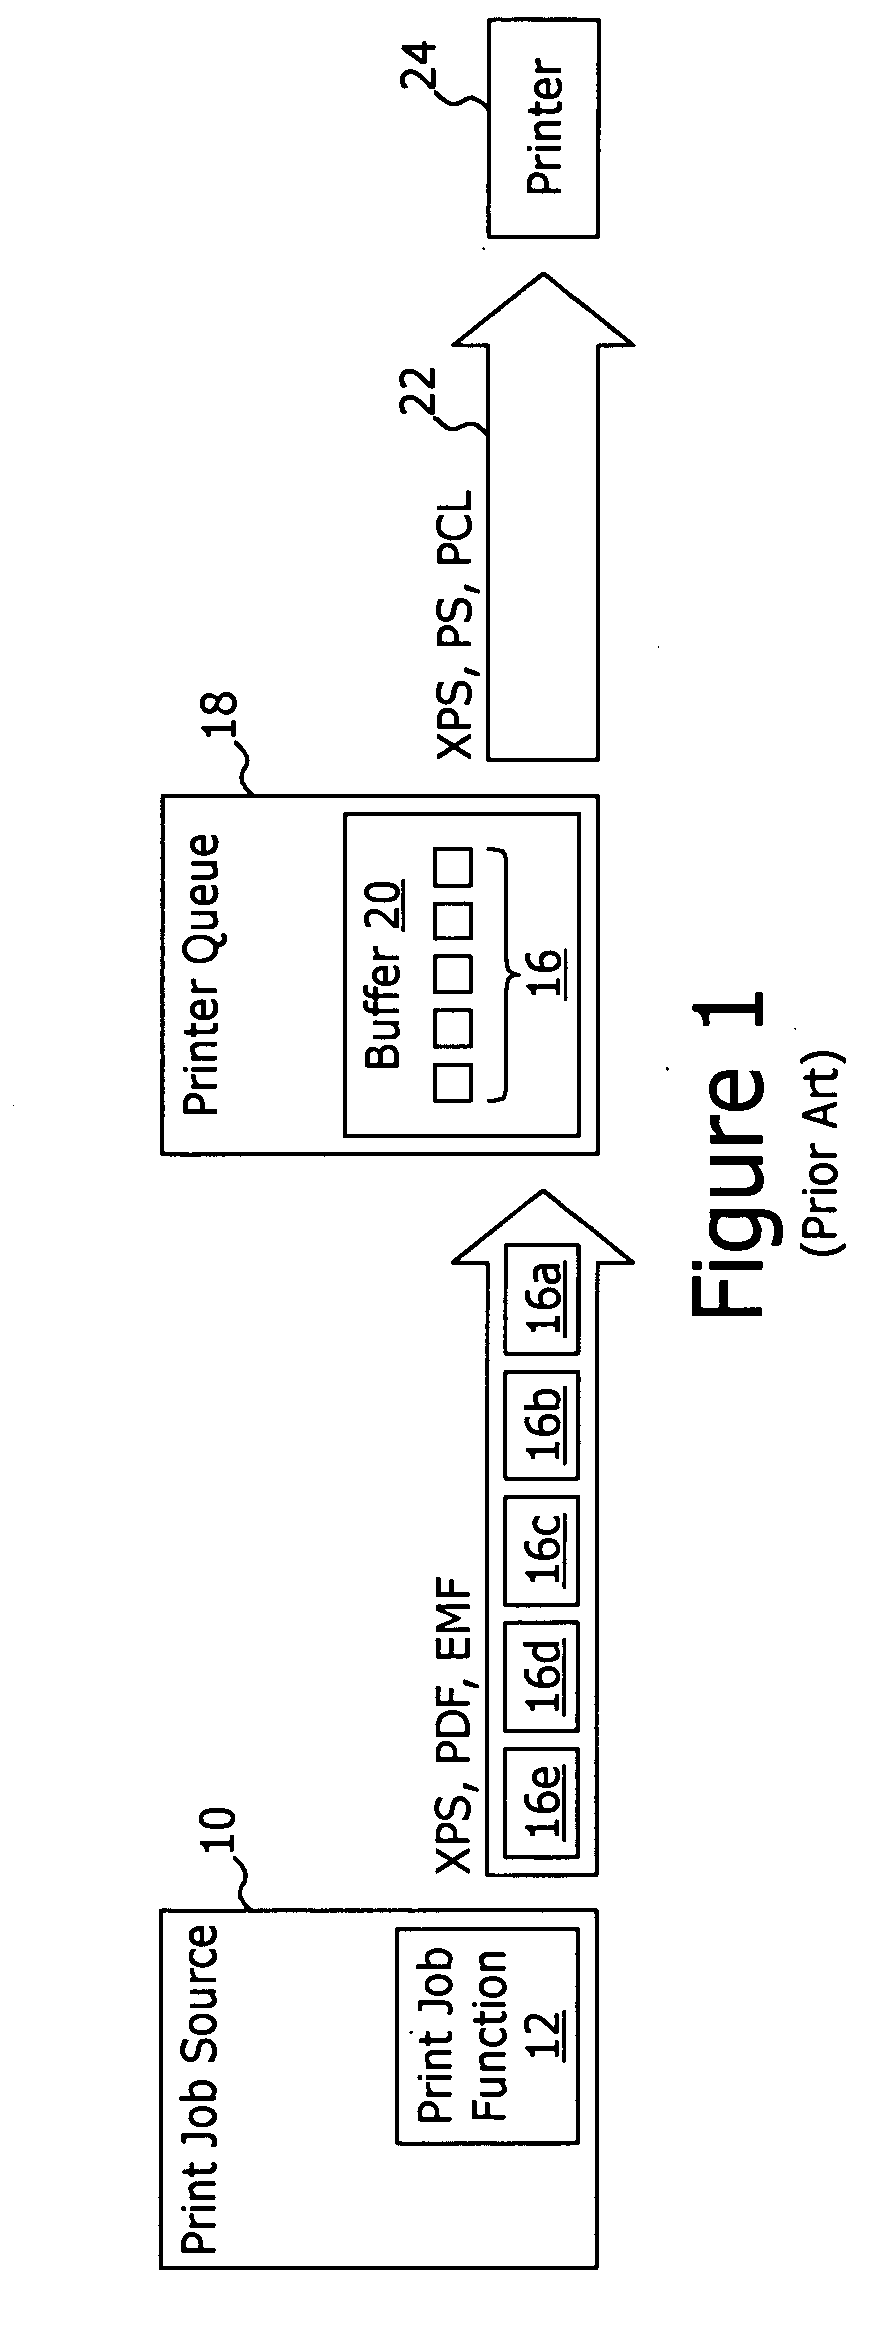 System and method for transferring invoice data output of a print job source to an automated data processing system